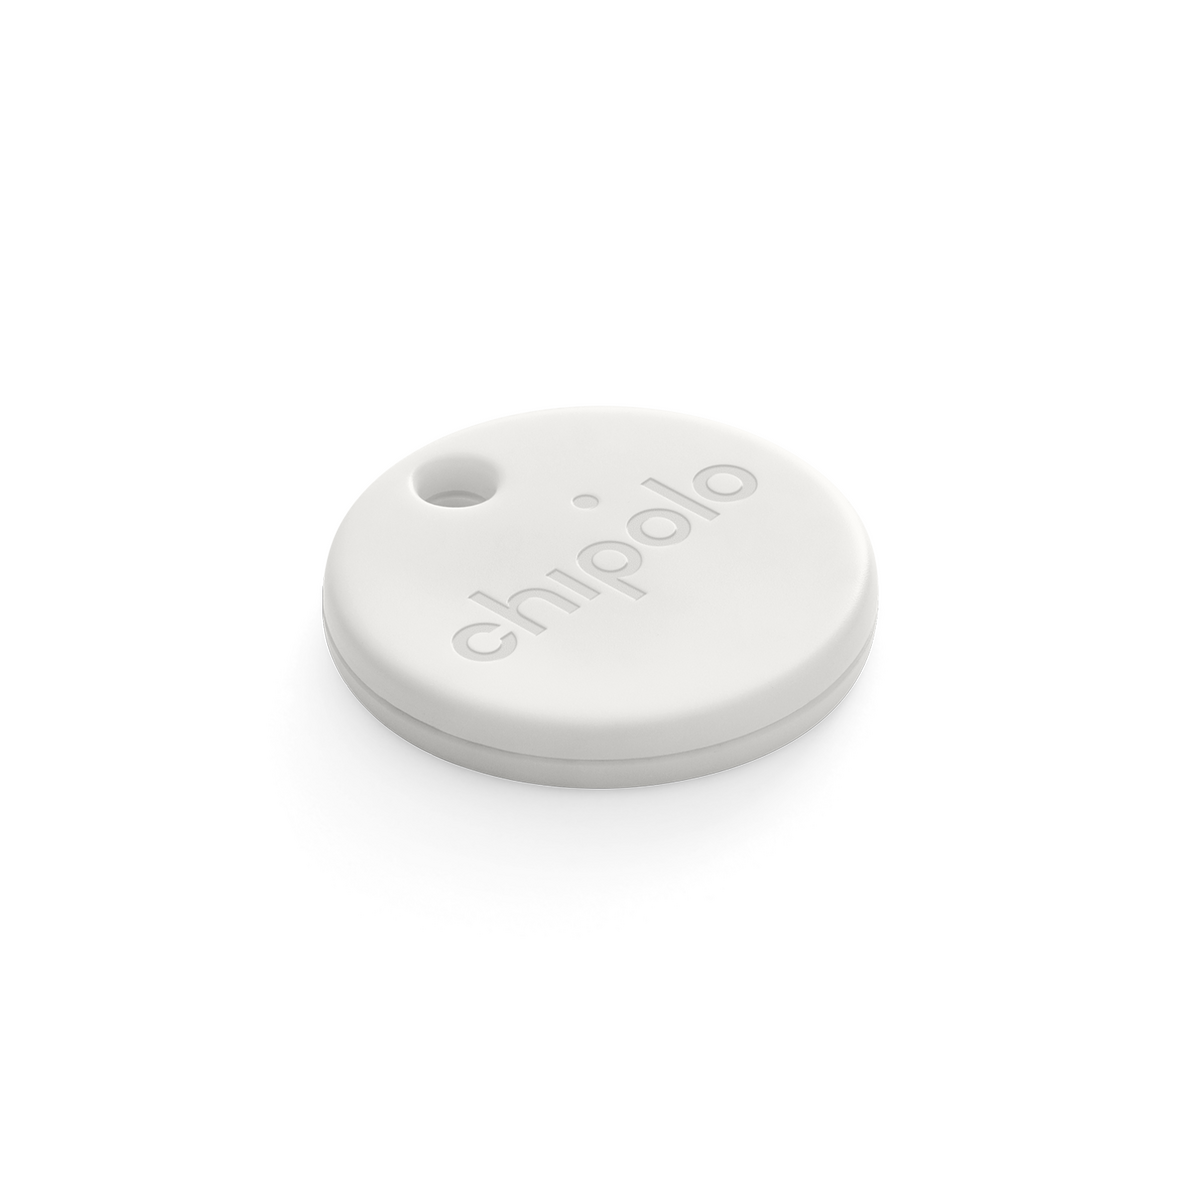 Chipolo One Point smart tracker on a white background